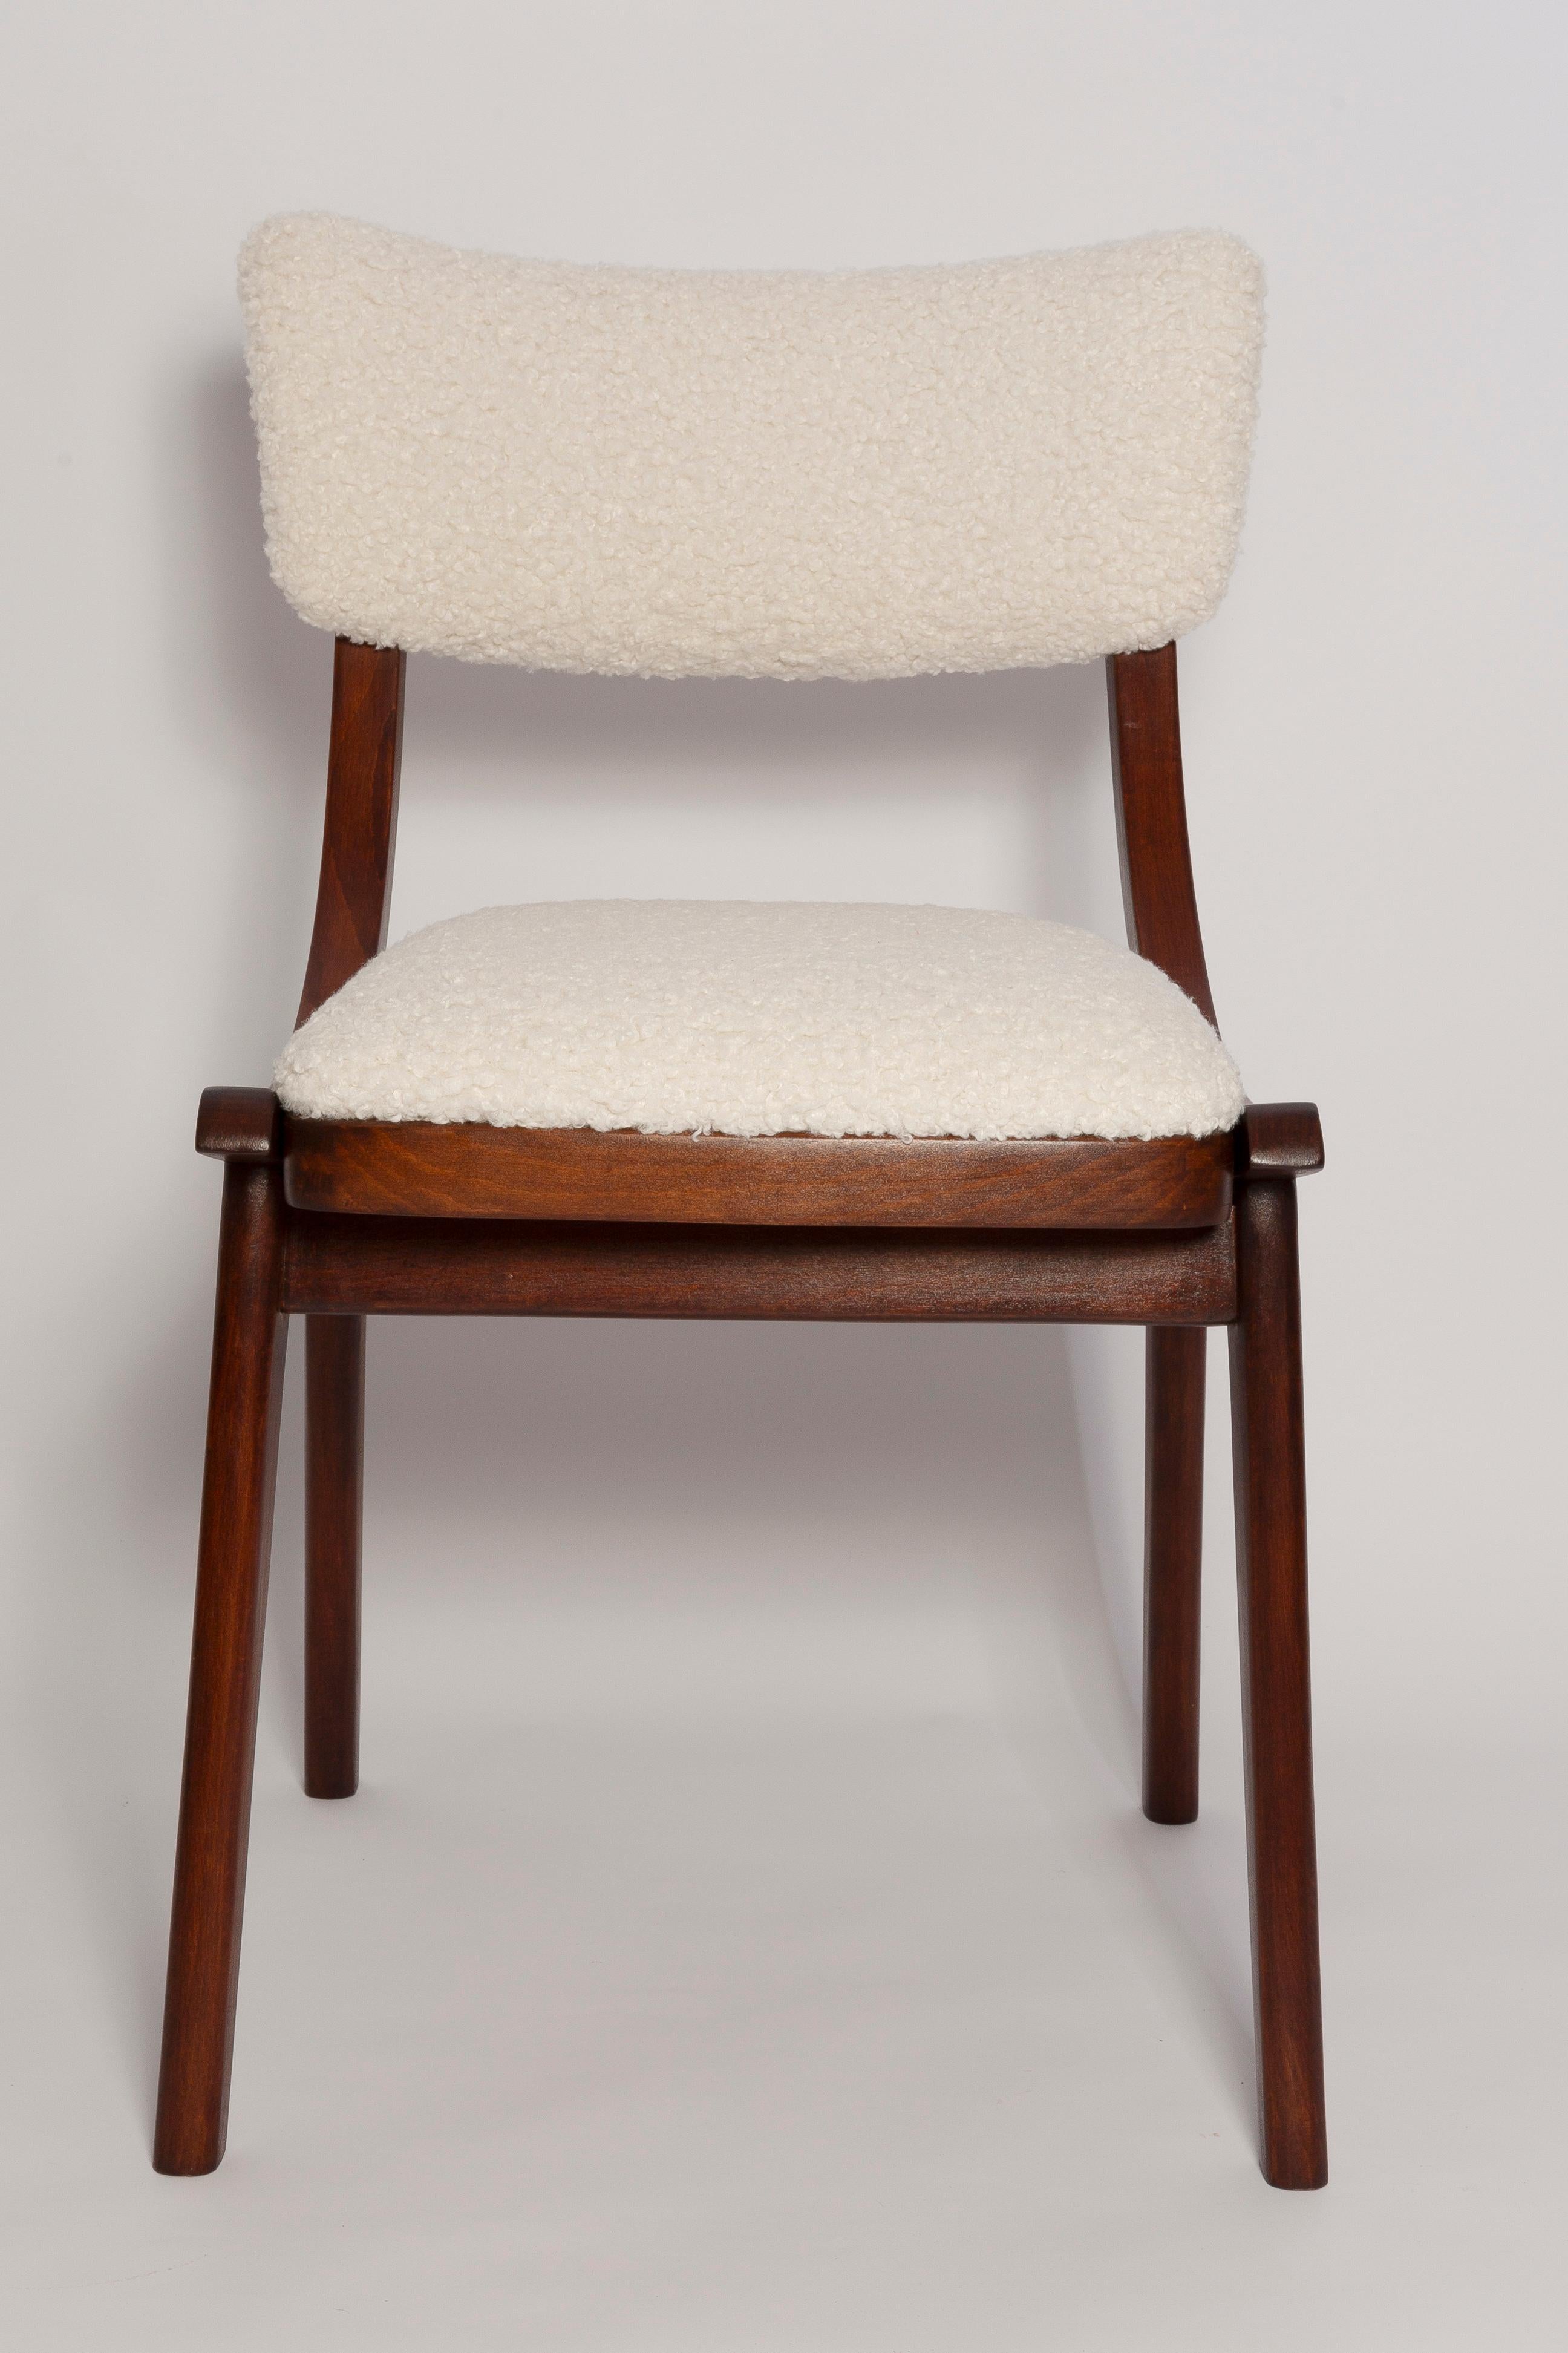 20th Century Mid Century Modern Bumerang Chair, Light Creme White Boucle, Poland, 1960s For Sale